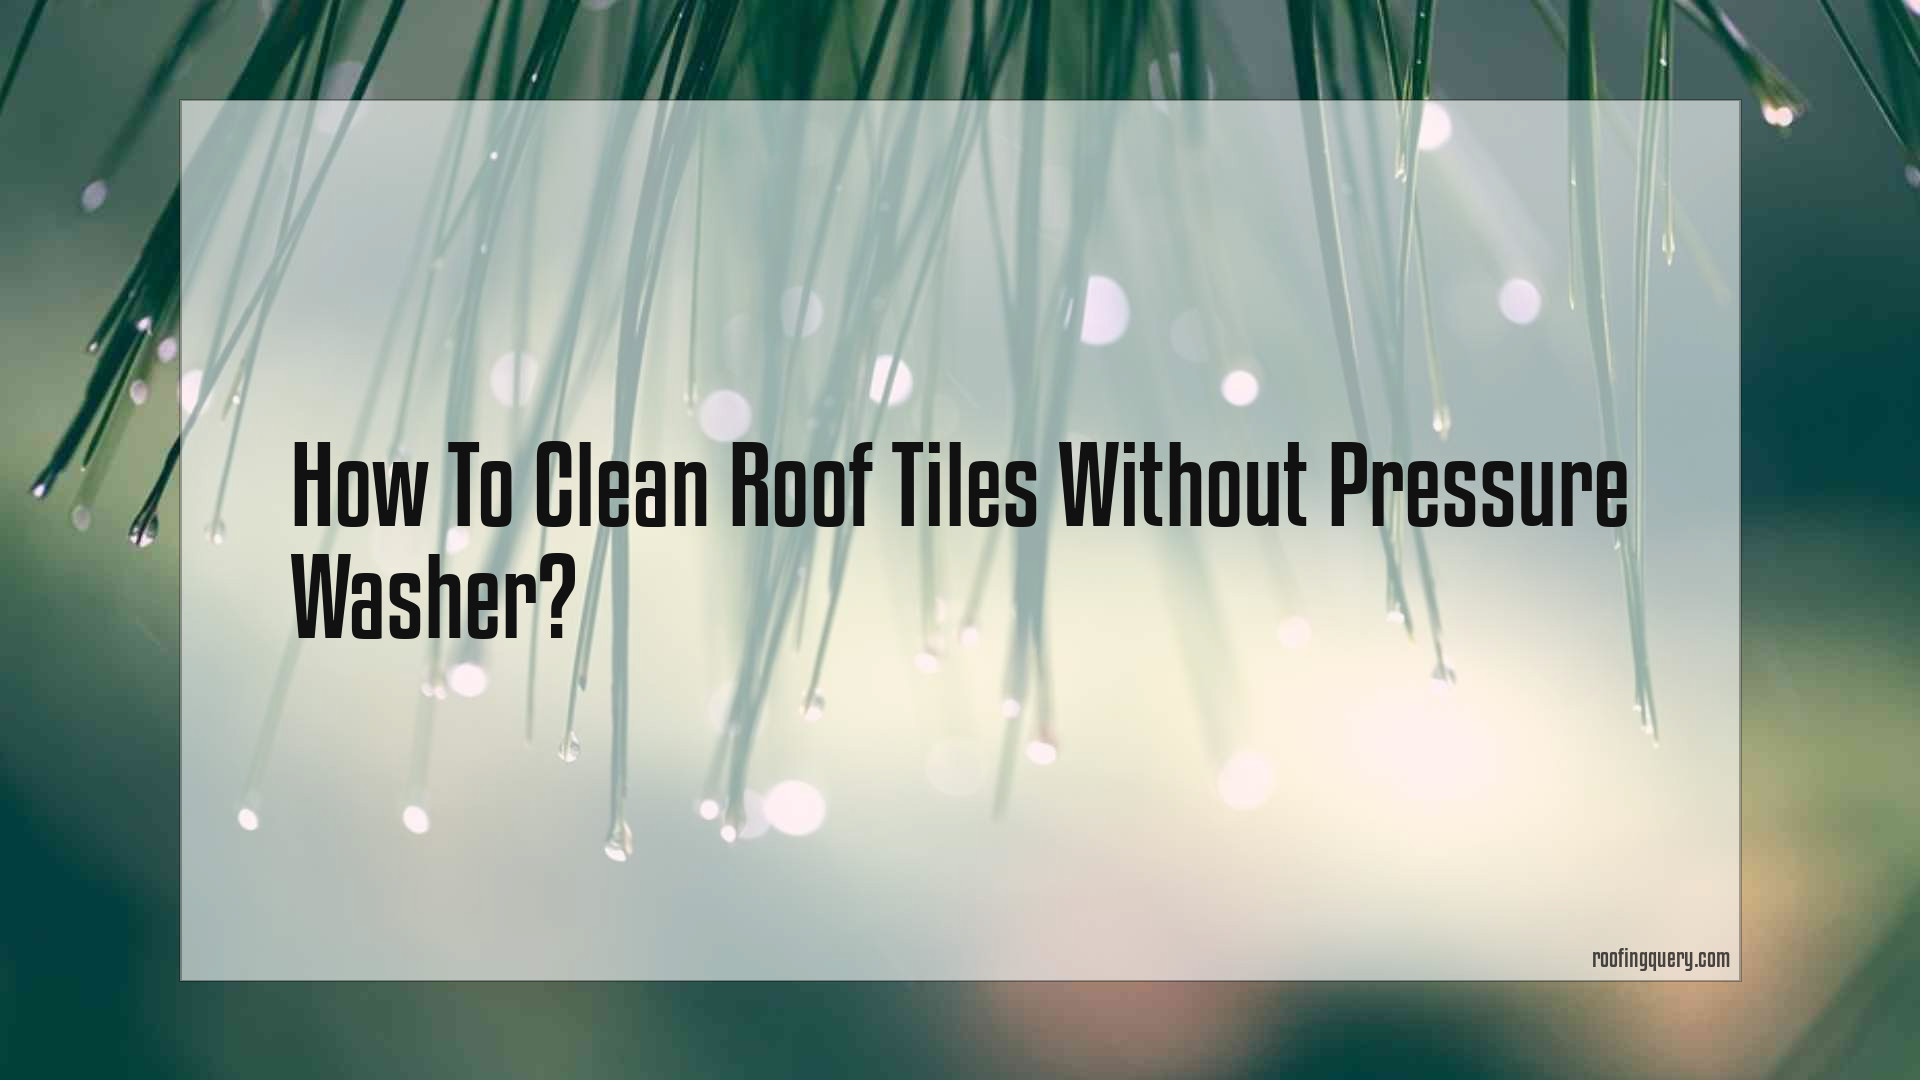 How To Clean Roof Tiles Without Pressure Washer